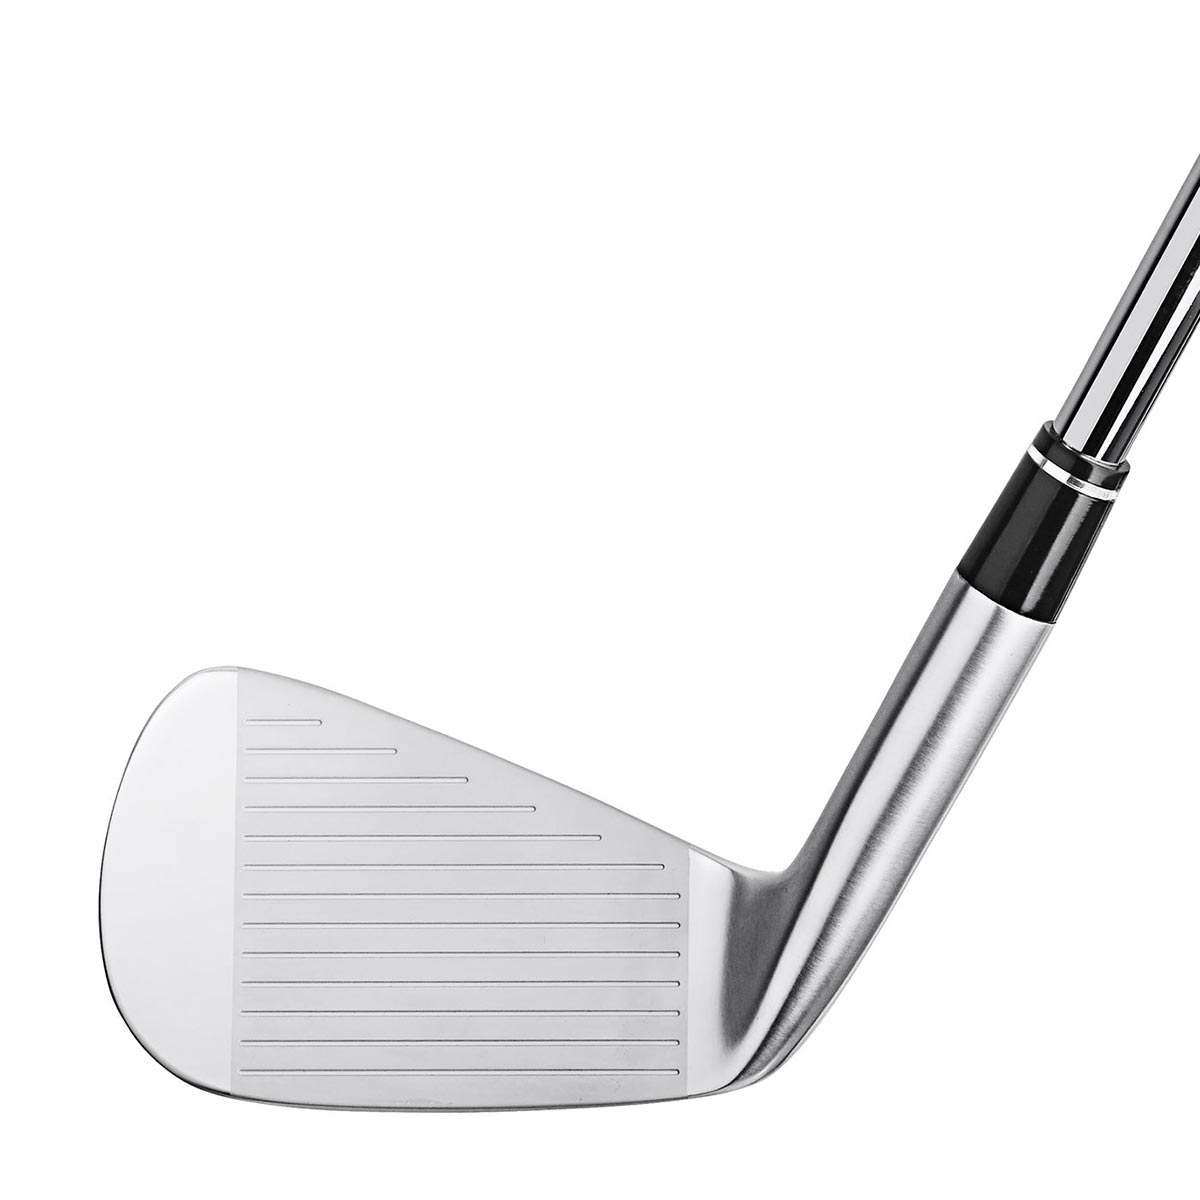 Honma TW Rose Proto MB Steel Irons from american golf